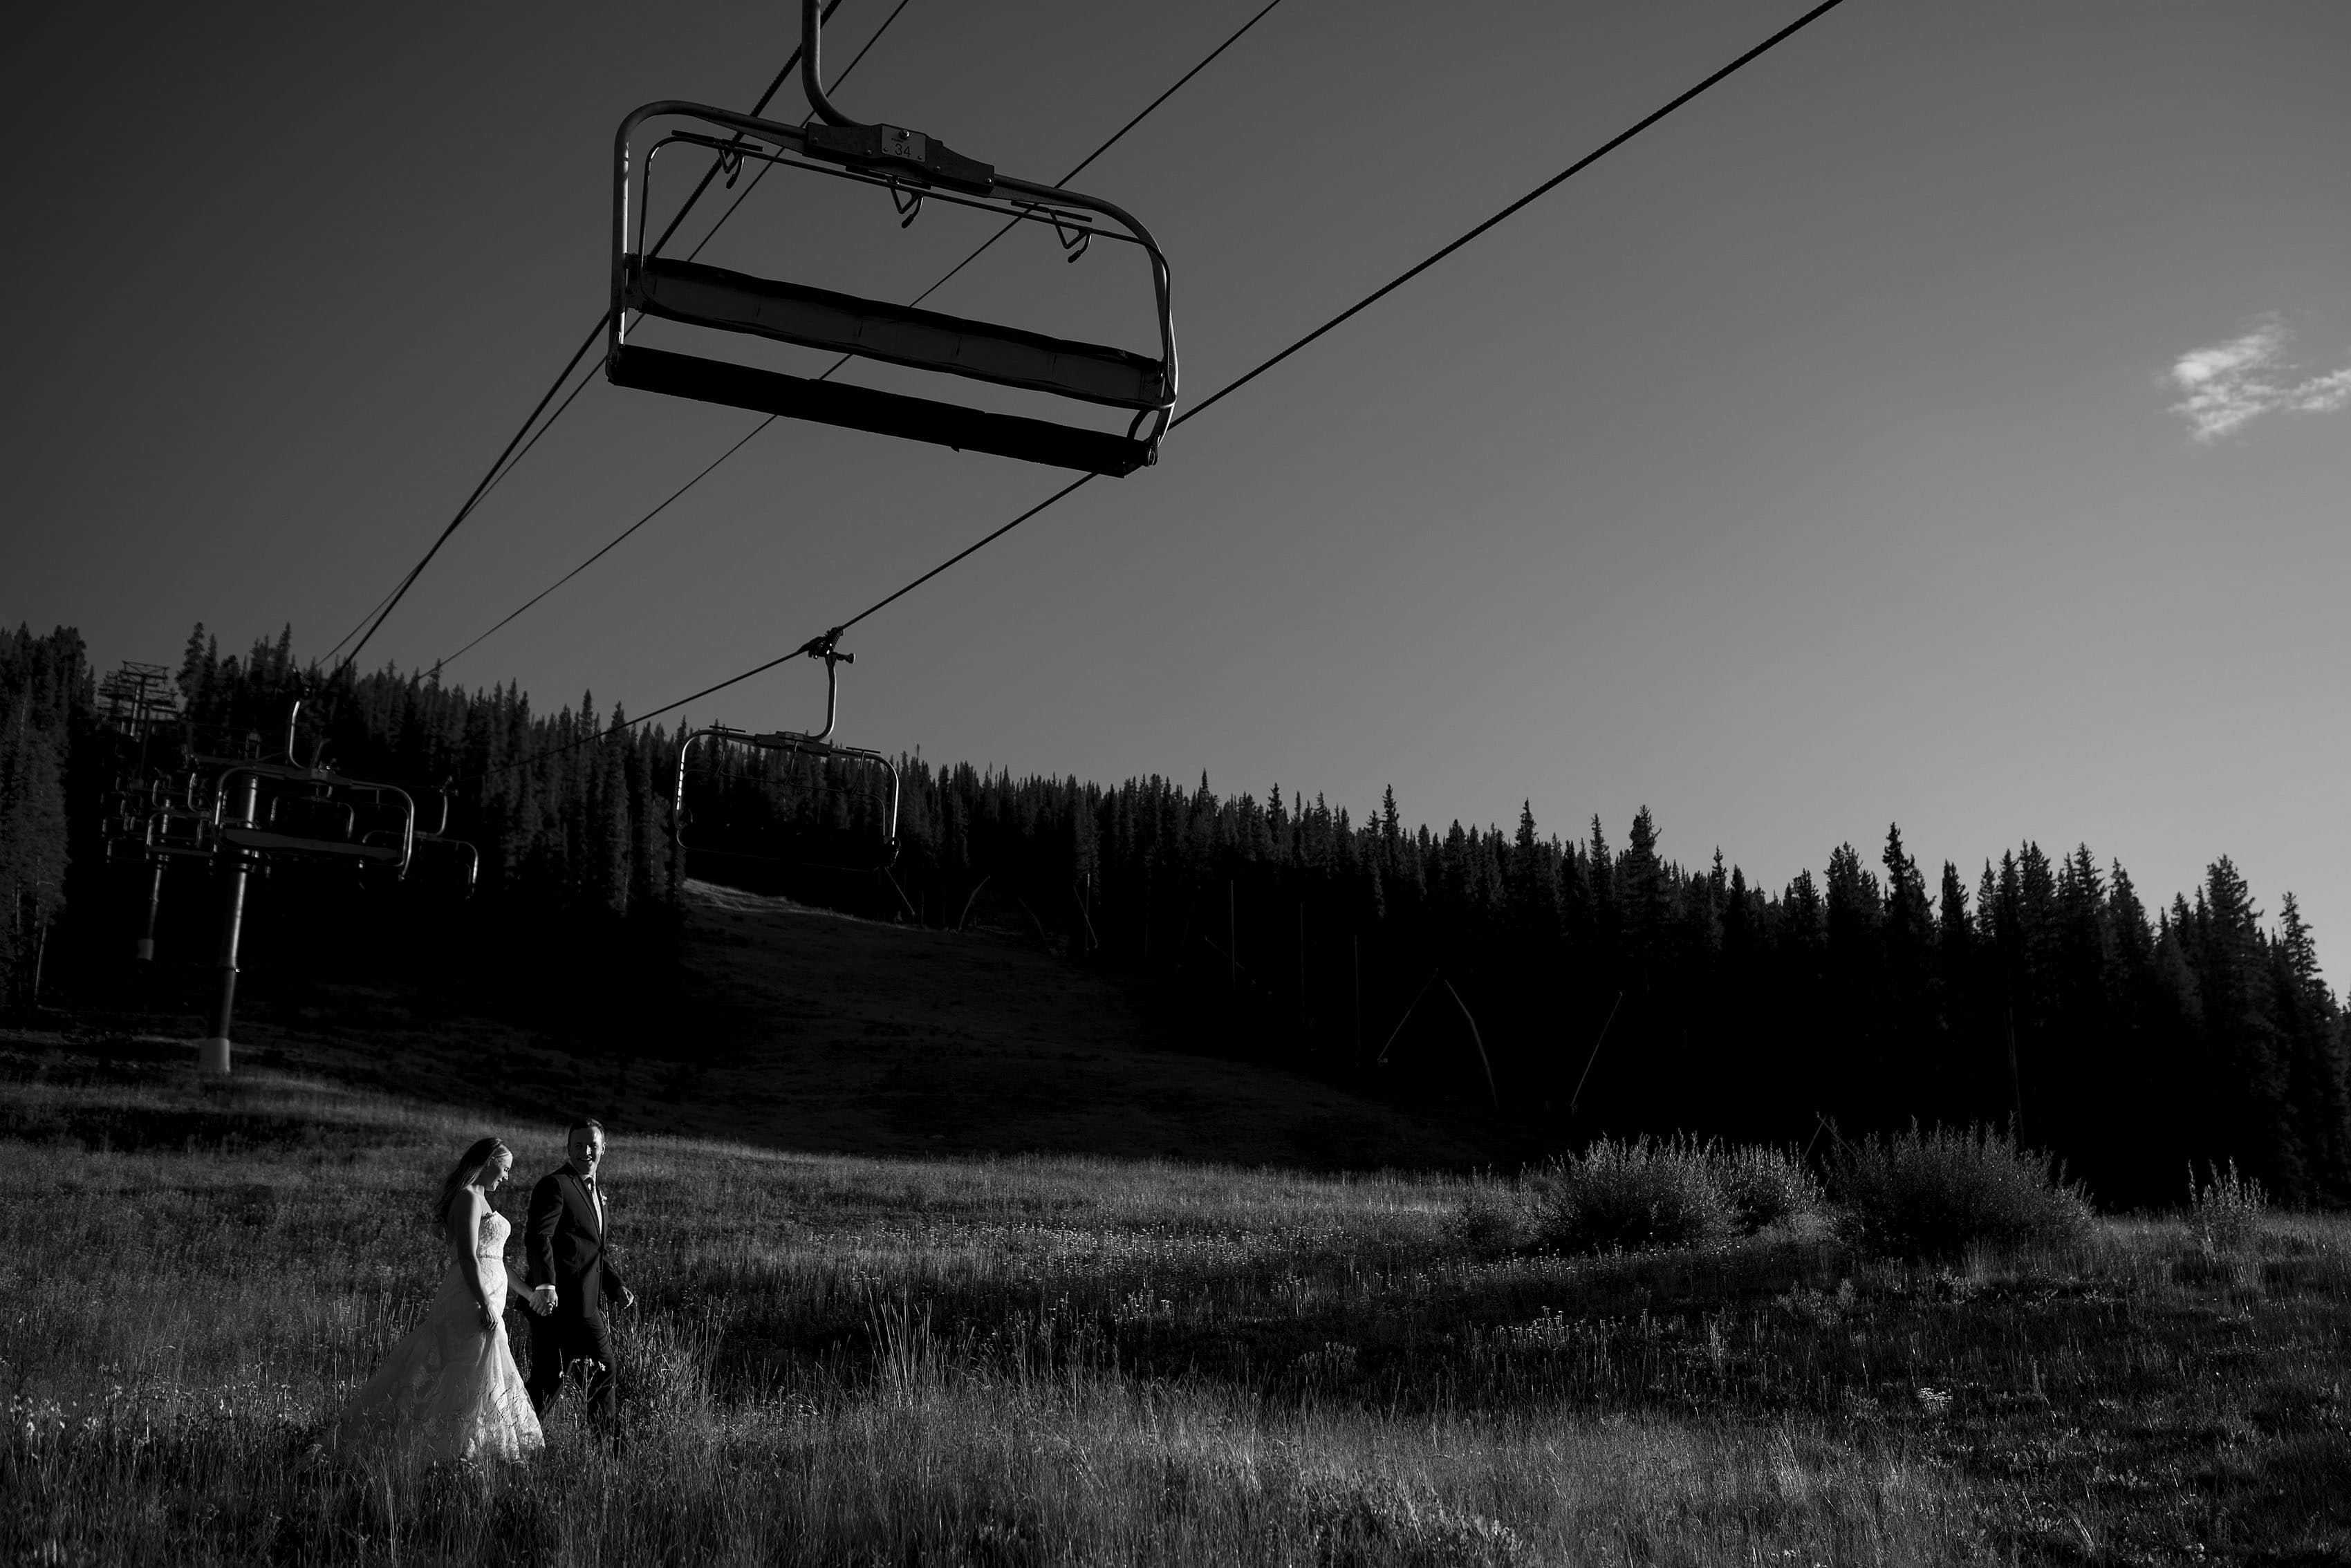 The newlyweds walk under the Super Bee lift during their wedding day at Copper Mountain